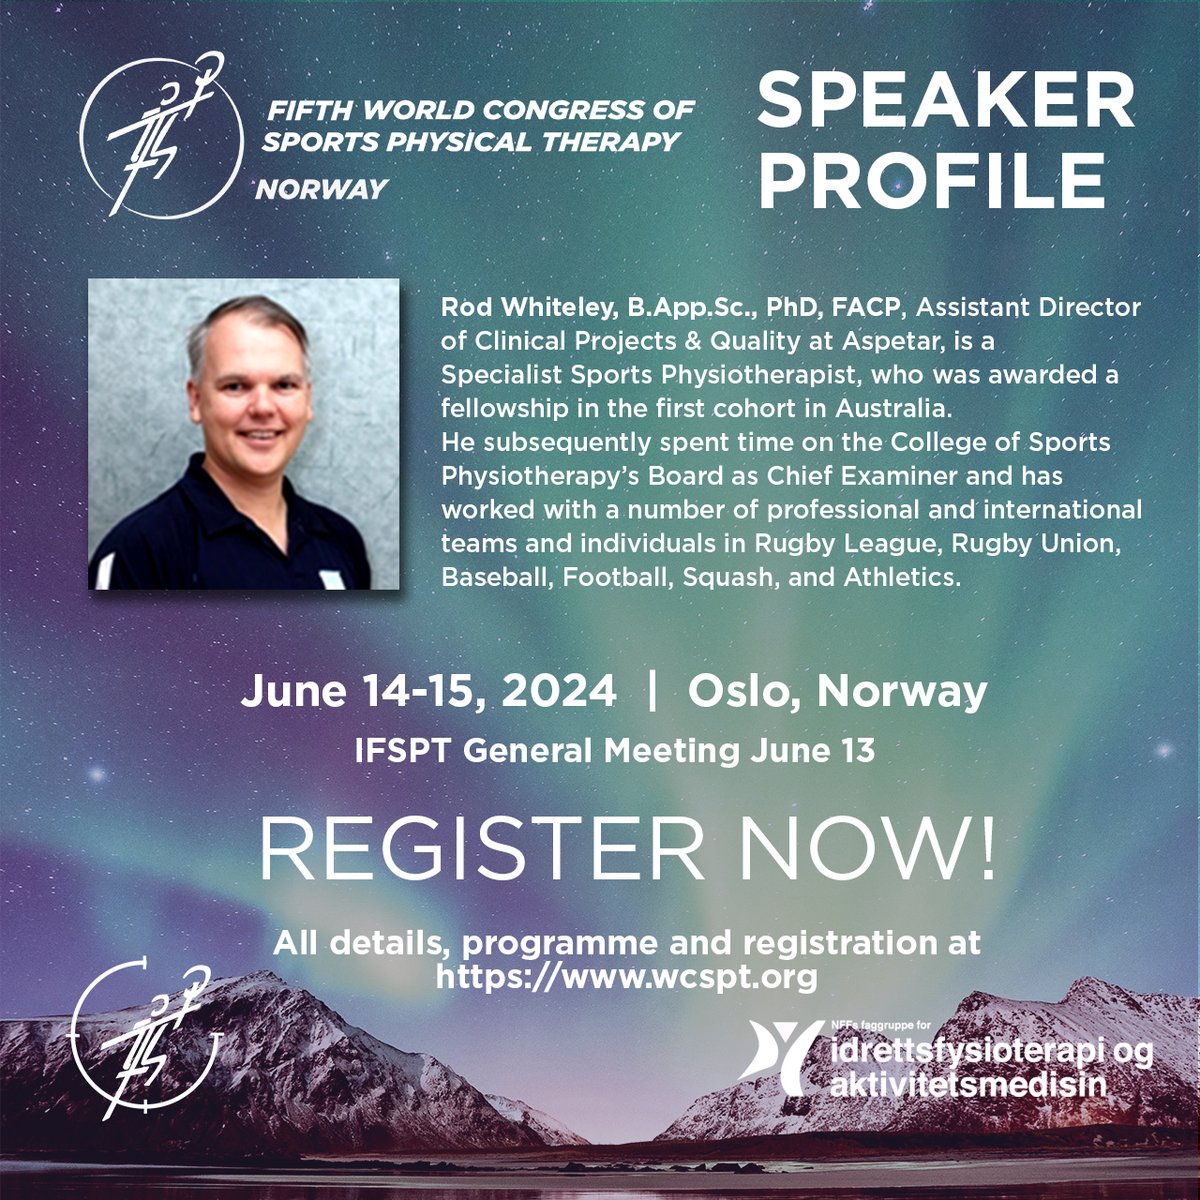 Join Speaker Rod Whiteley at the Fifth World Congress of Sports Physical Therapy in Oslo on June 14-15! REGISTER NOW while exchange rates are beneficial! wcspt.org